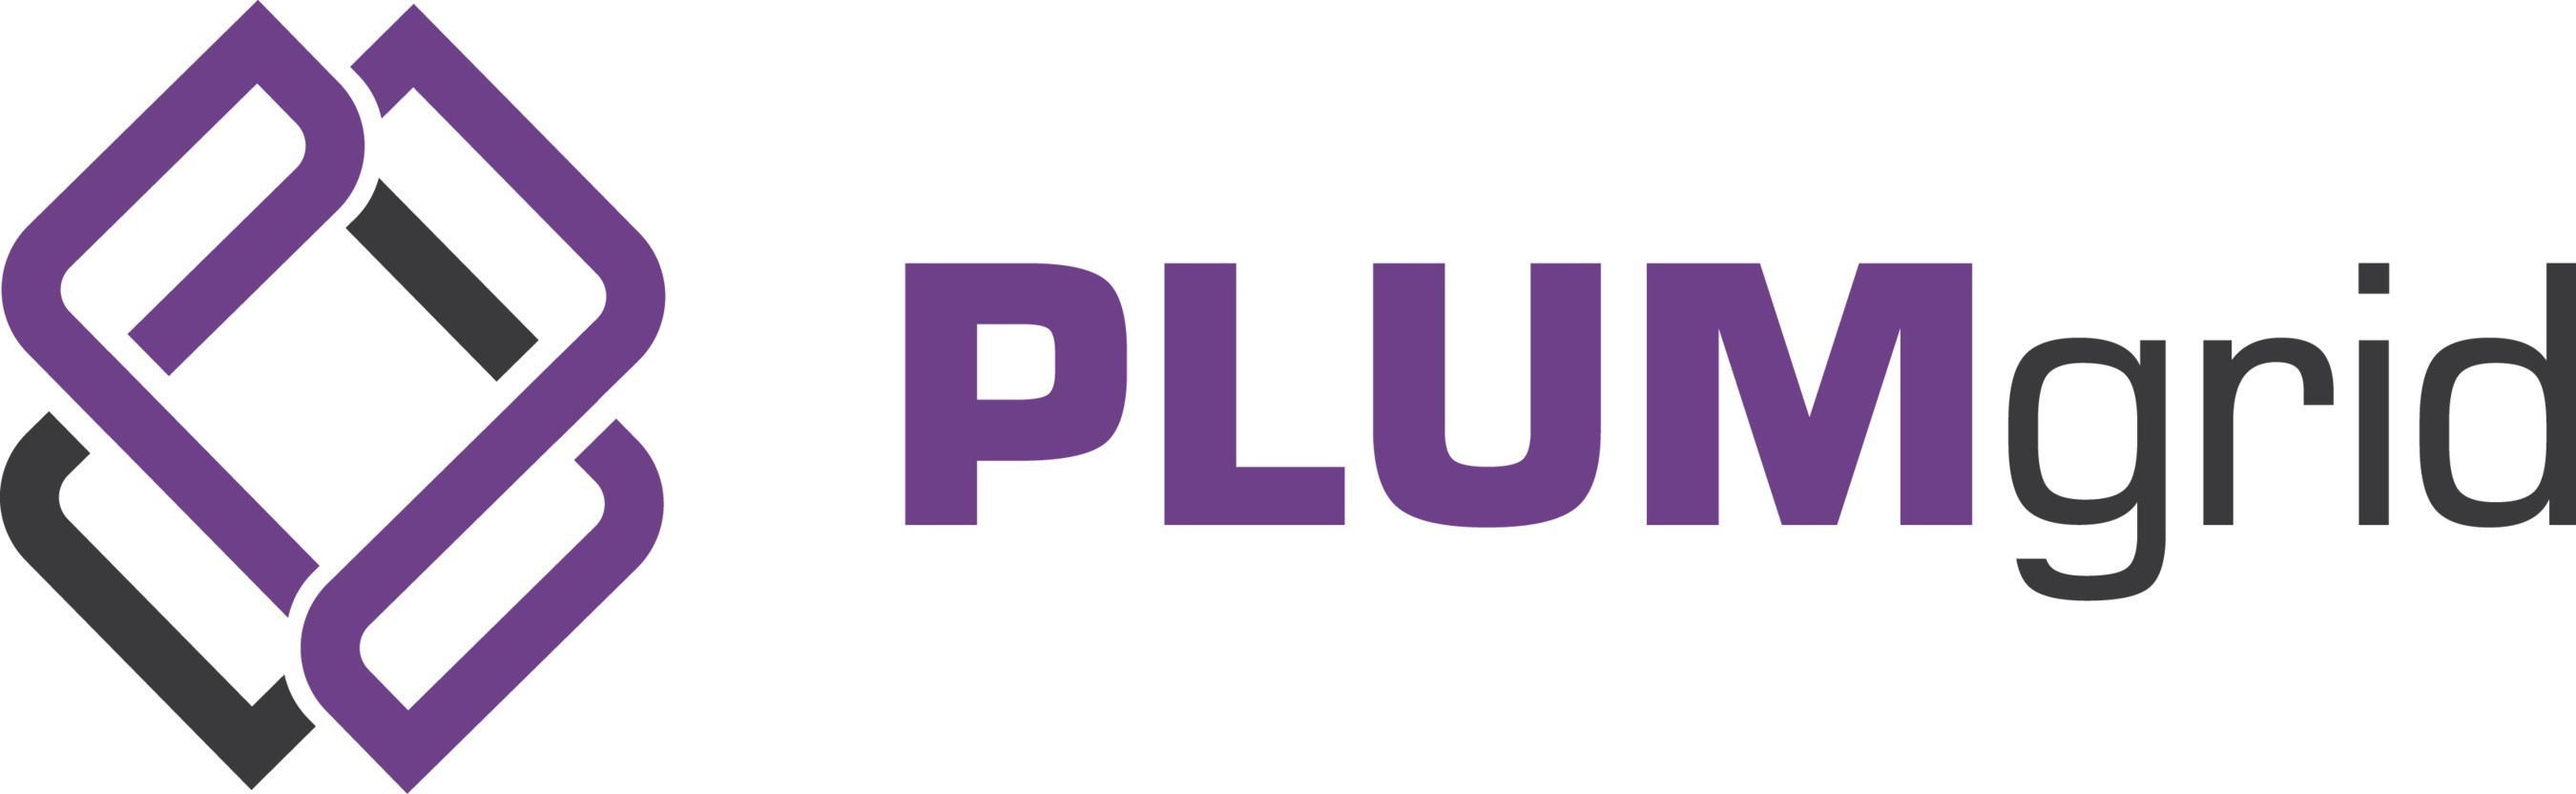 PLUMgrid is a leading innovator of virtual network infrastructure for OpenStack clouds. (PRNewsFoto/PLUMgrid)